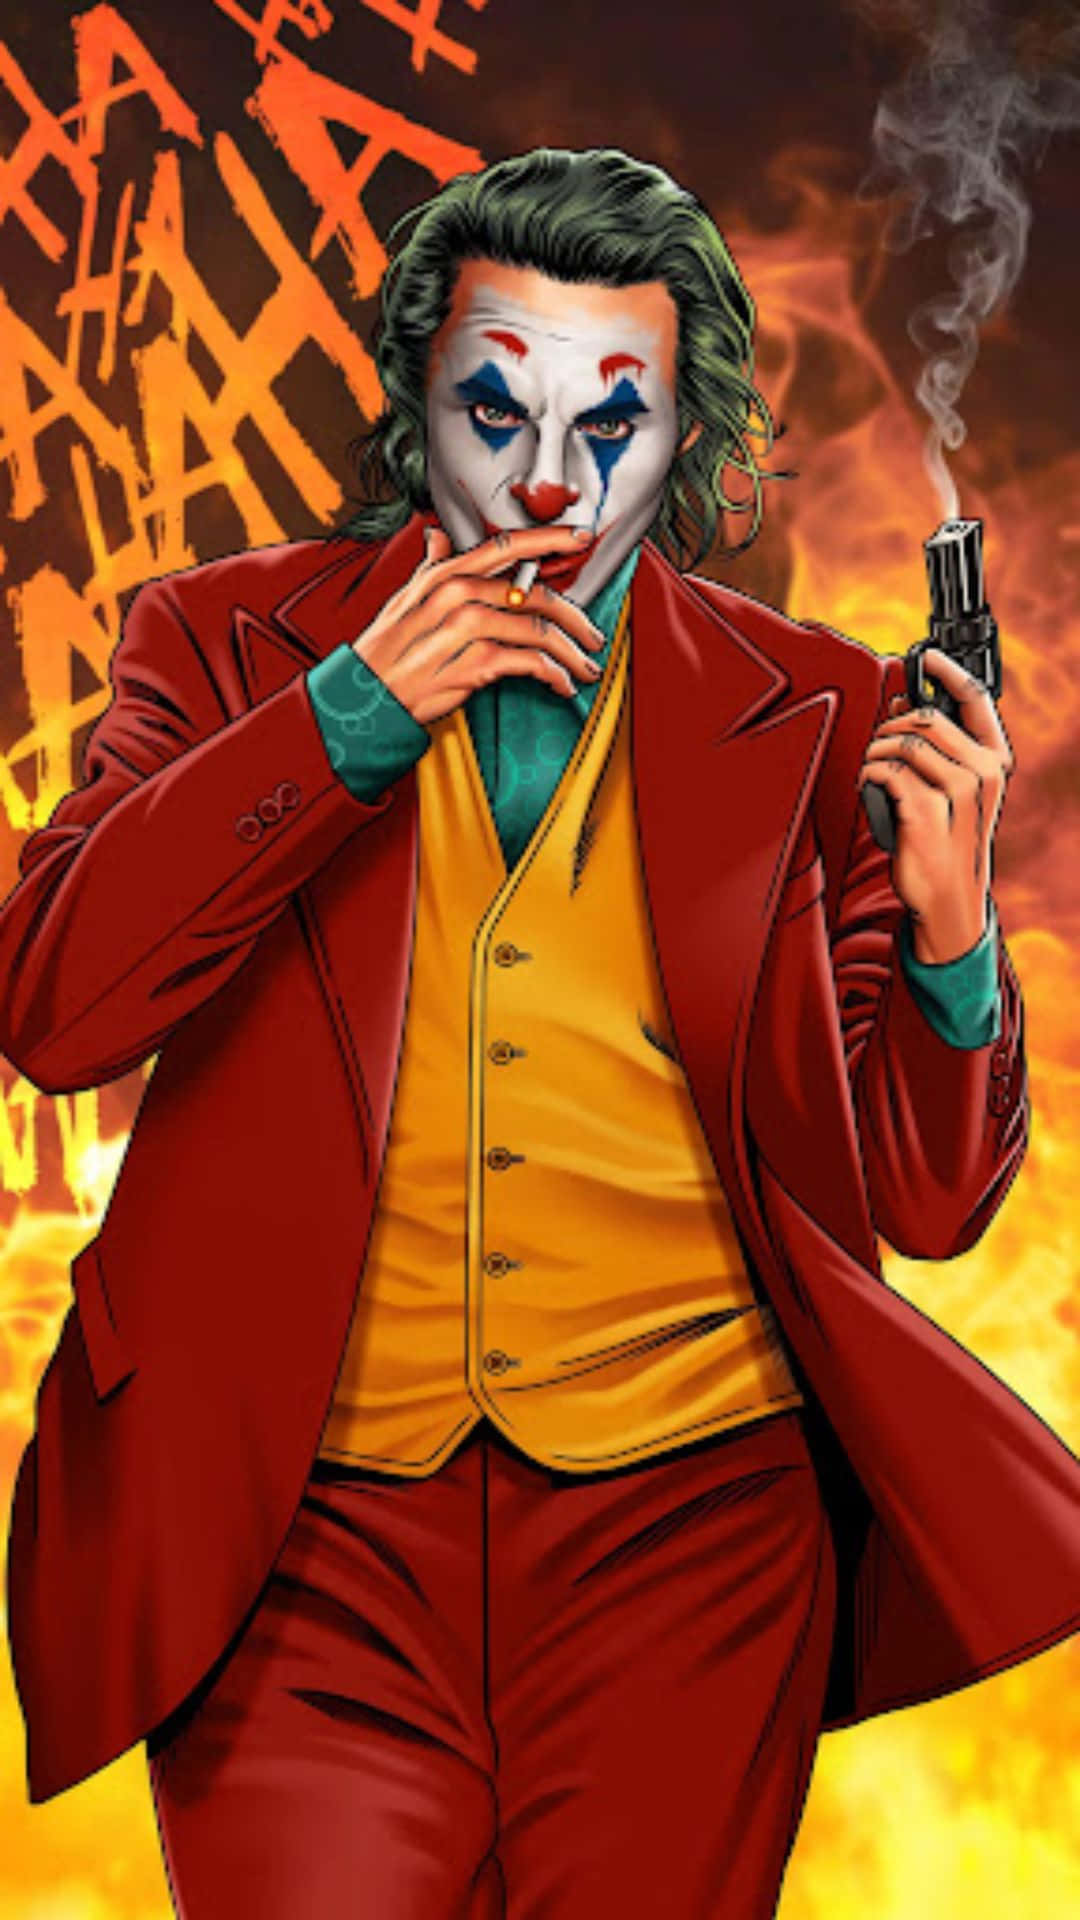 The Clown Prince of Crime